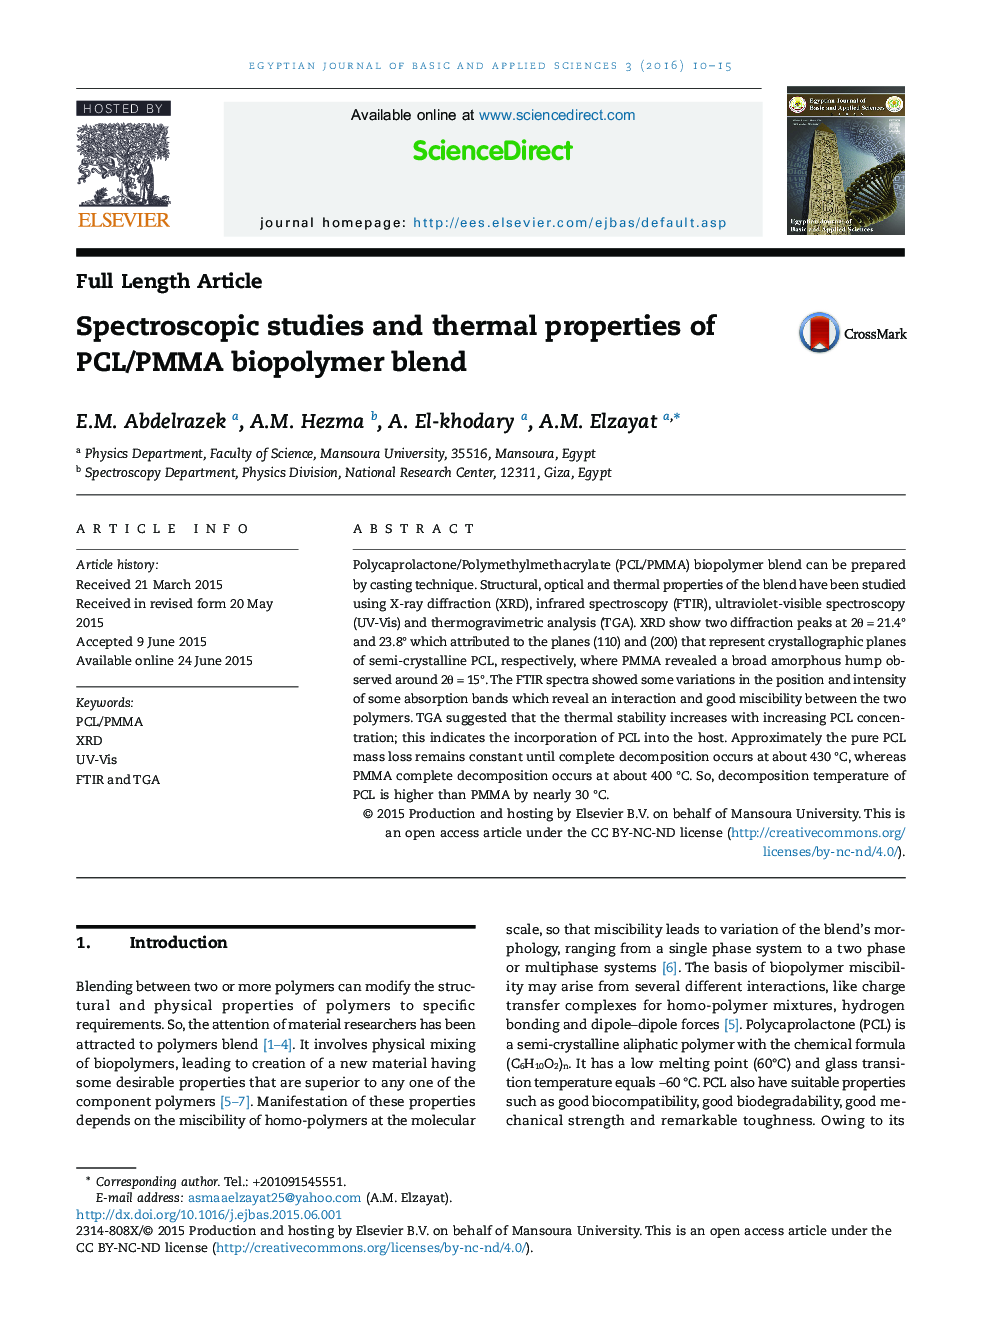 Spectroscopic studies and thermal properties of PCL/PMMA biopolymer blend